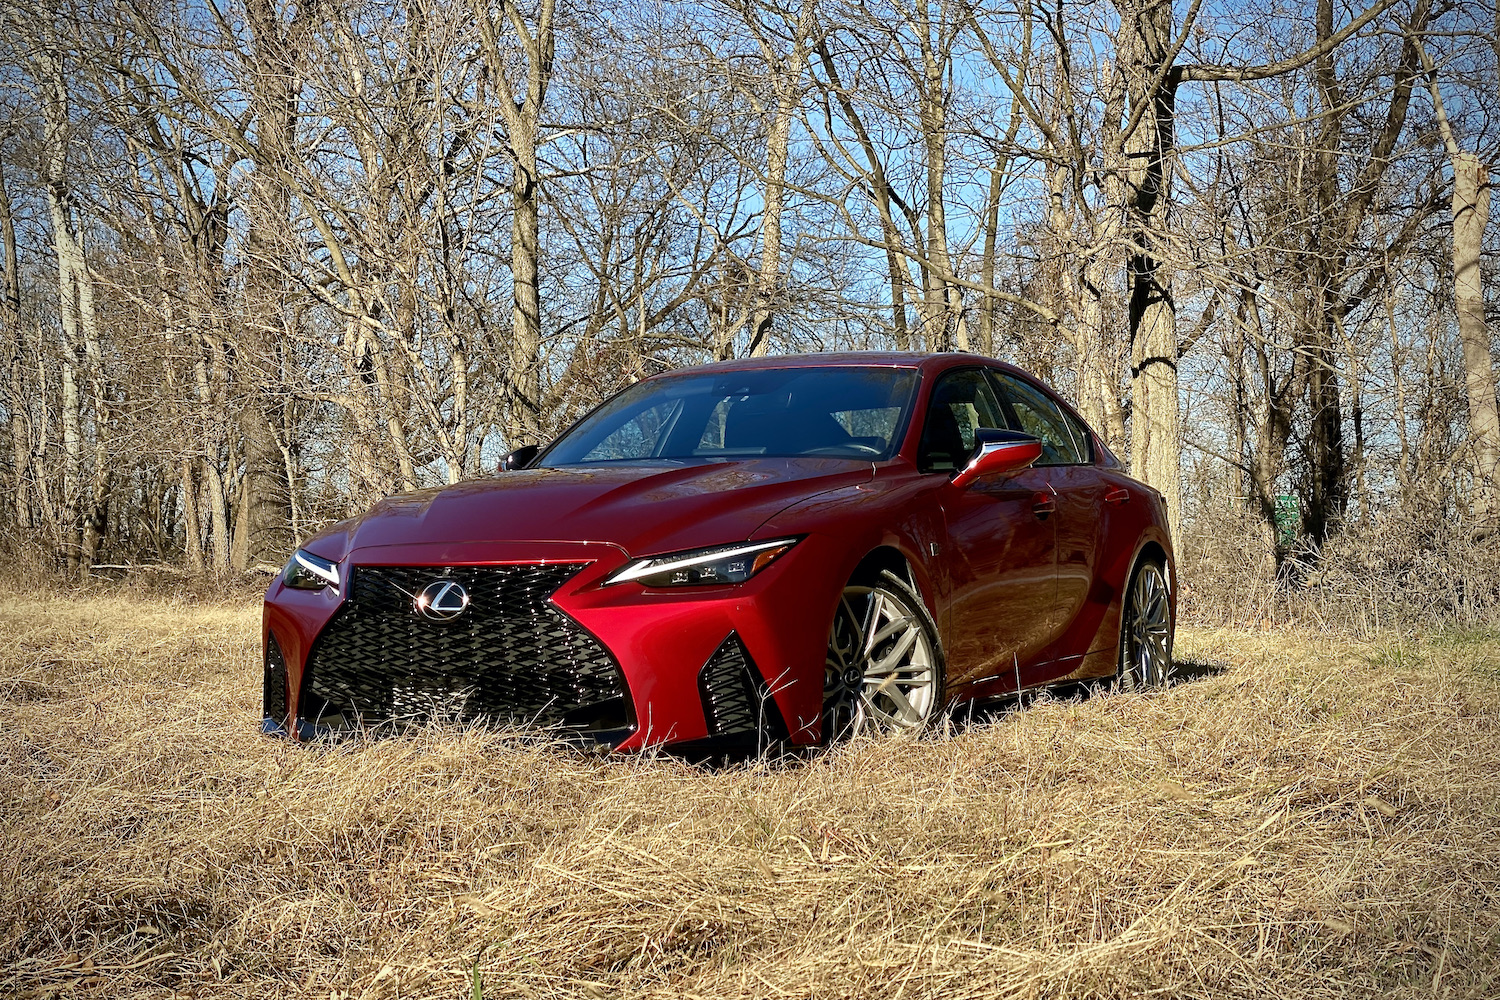 Lexus IS 500 front end from driver's side in a grassy field.